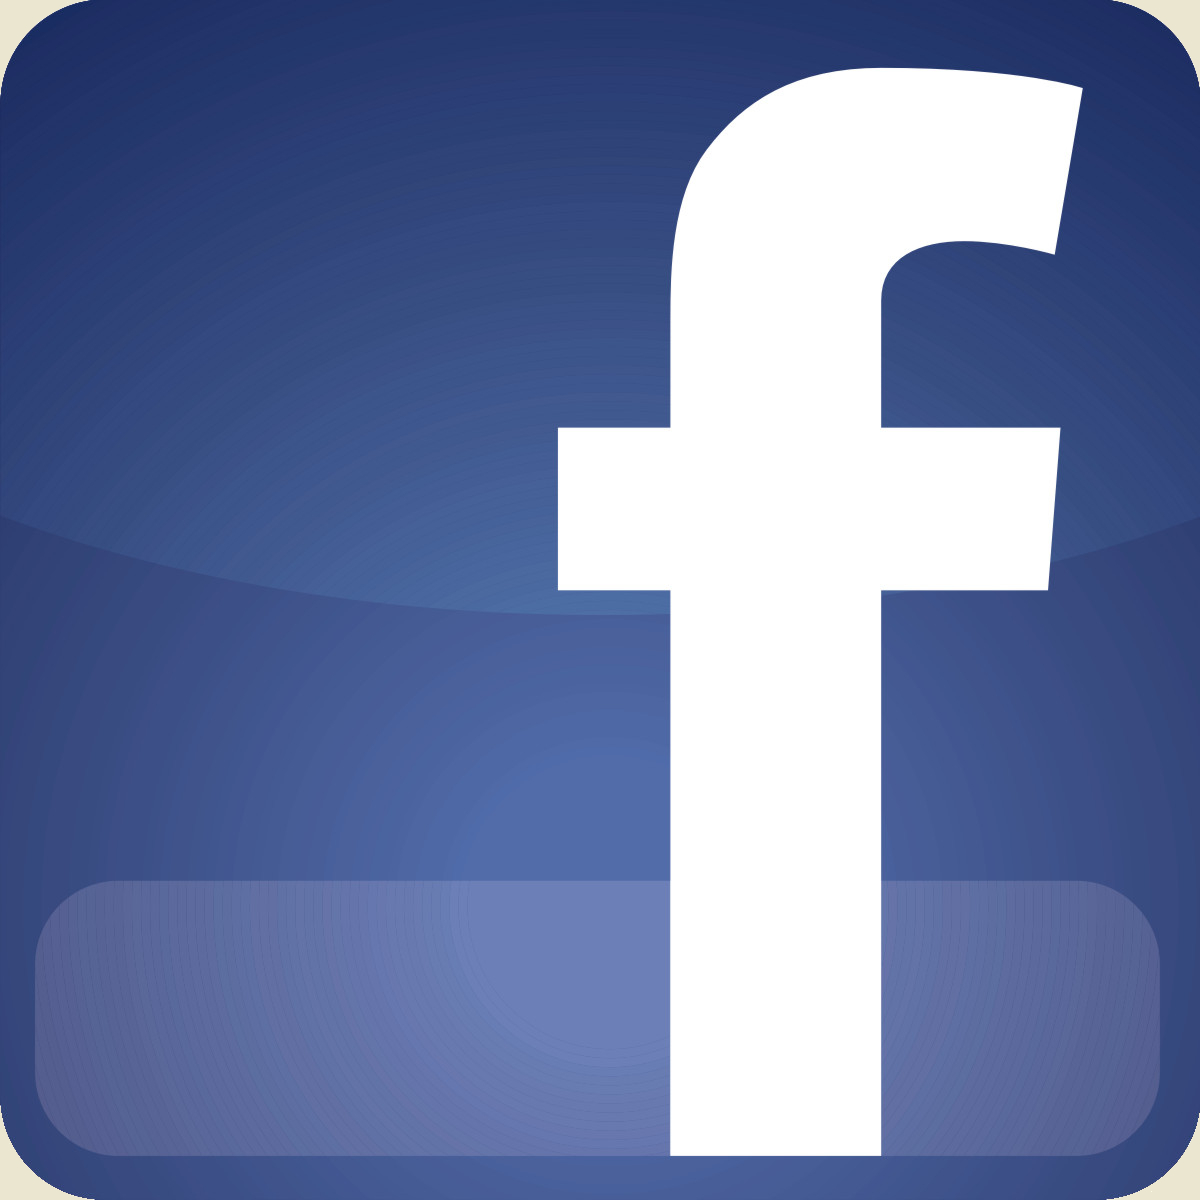 Facebook Clipart Icon Free .